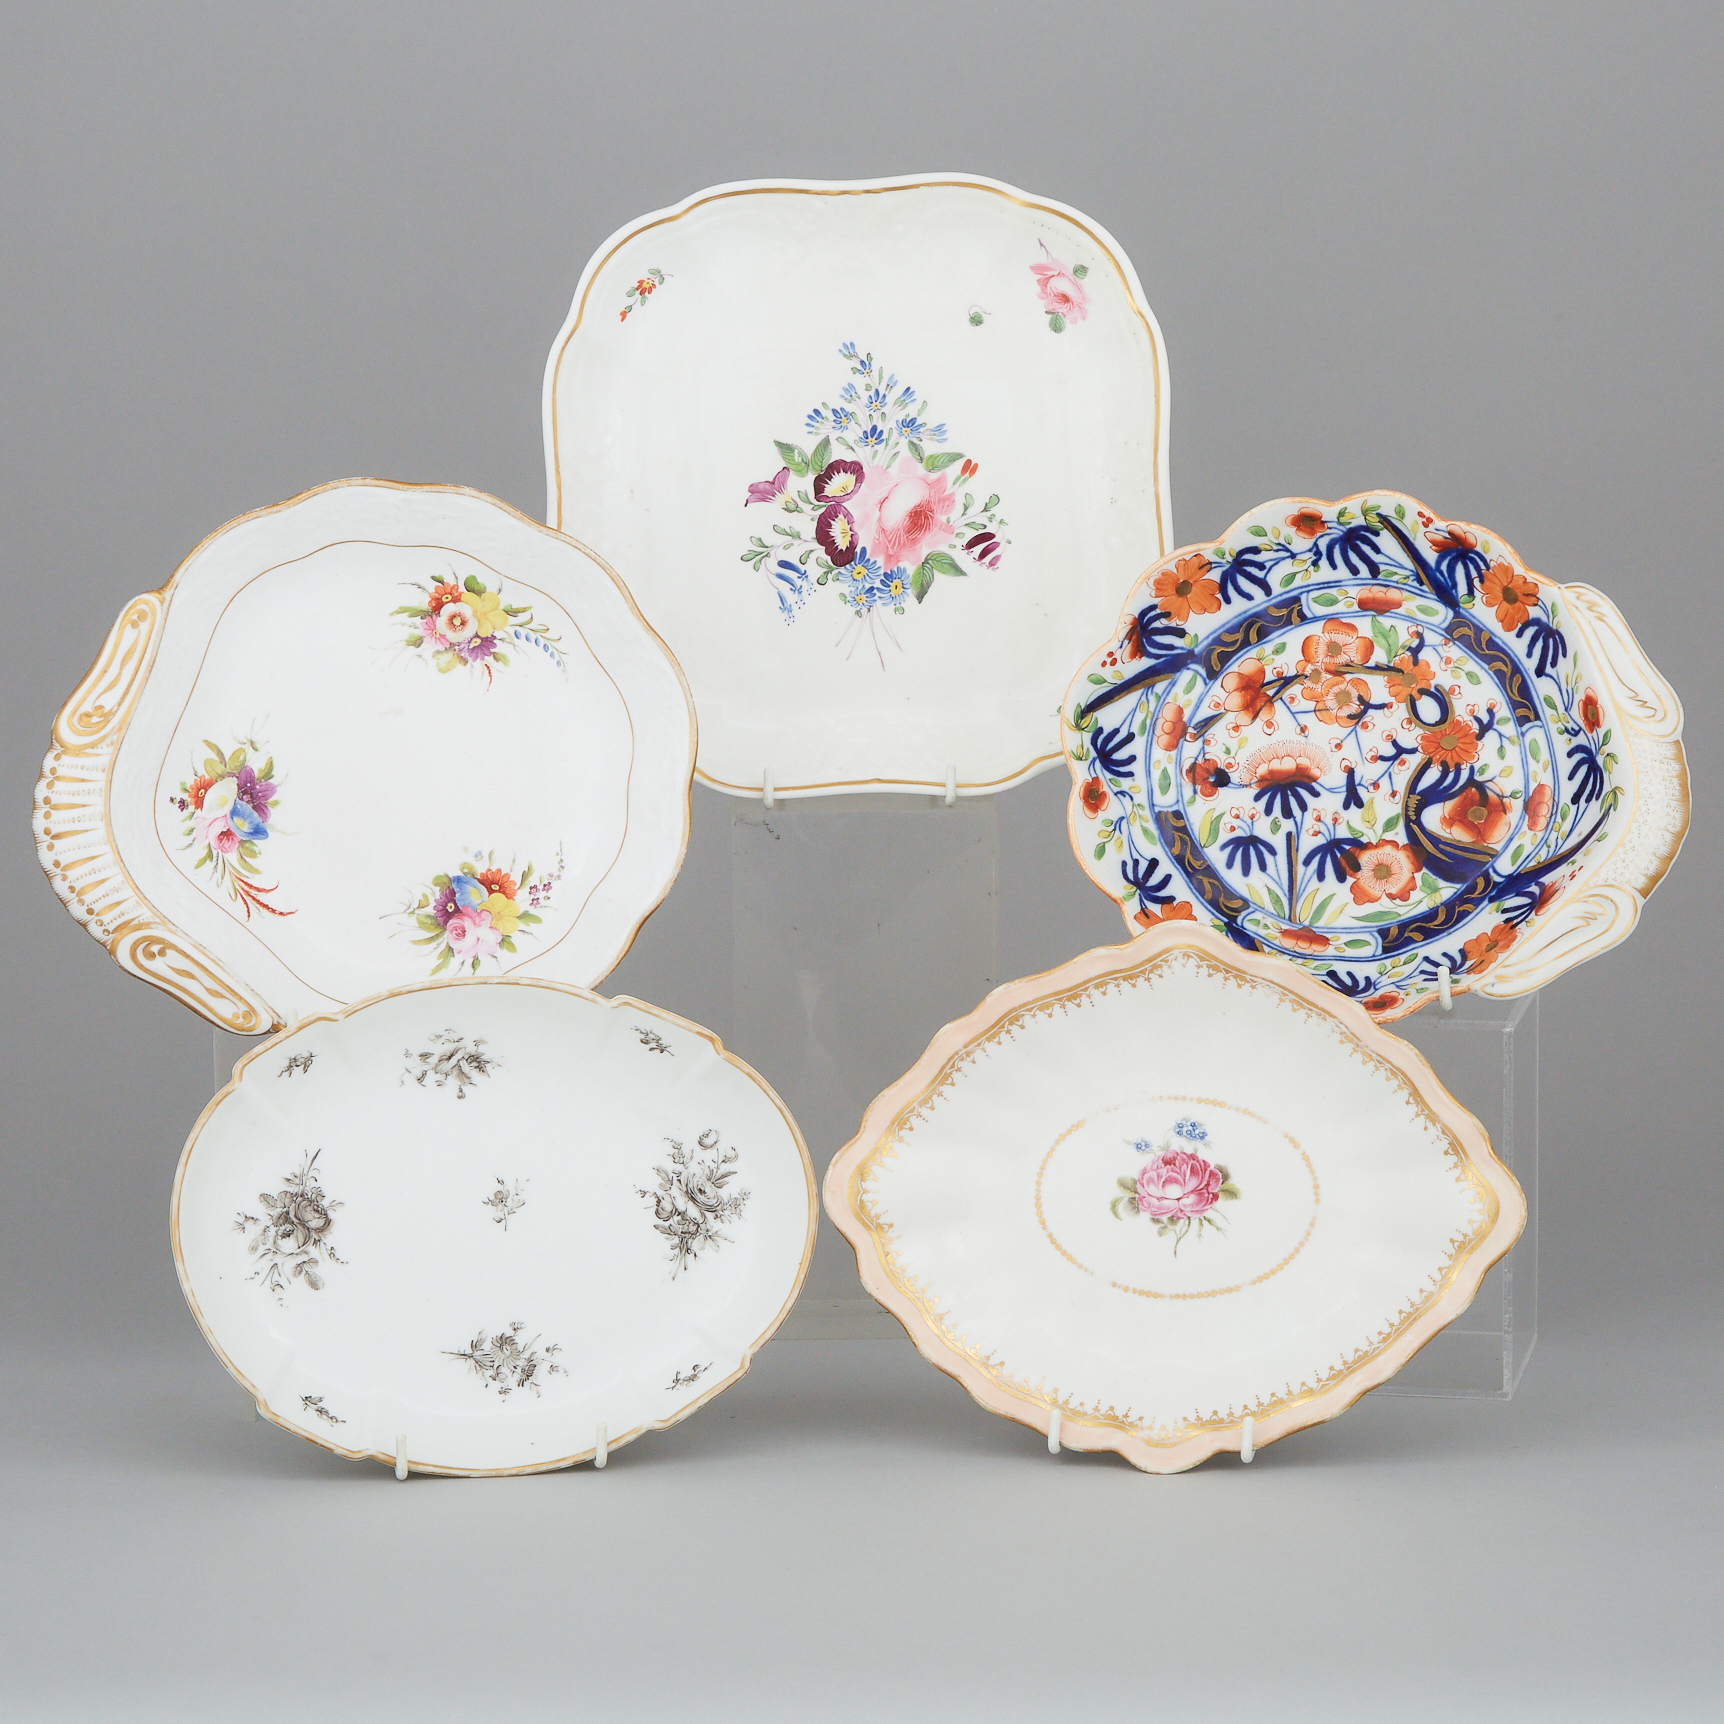 Five Various English and French Porcelain Dishes, early 19th century